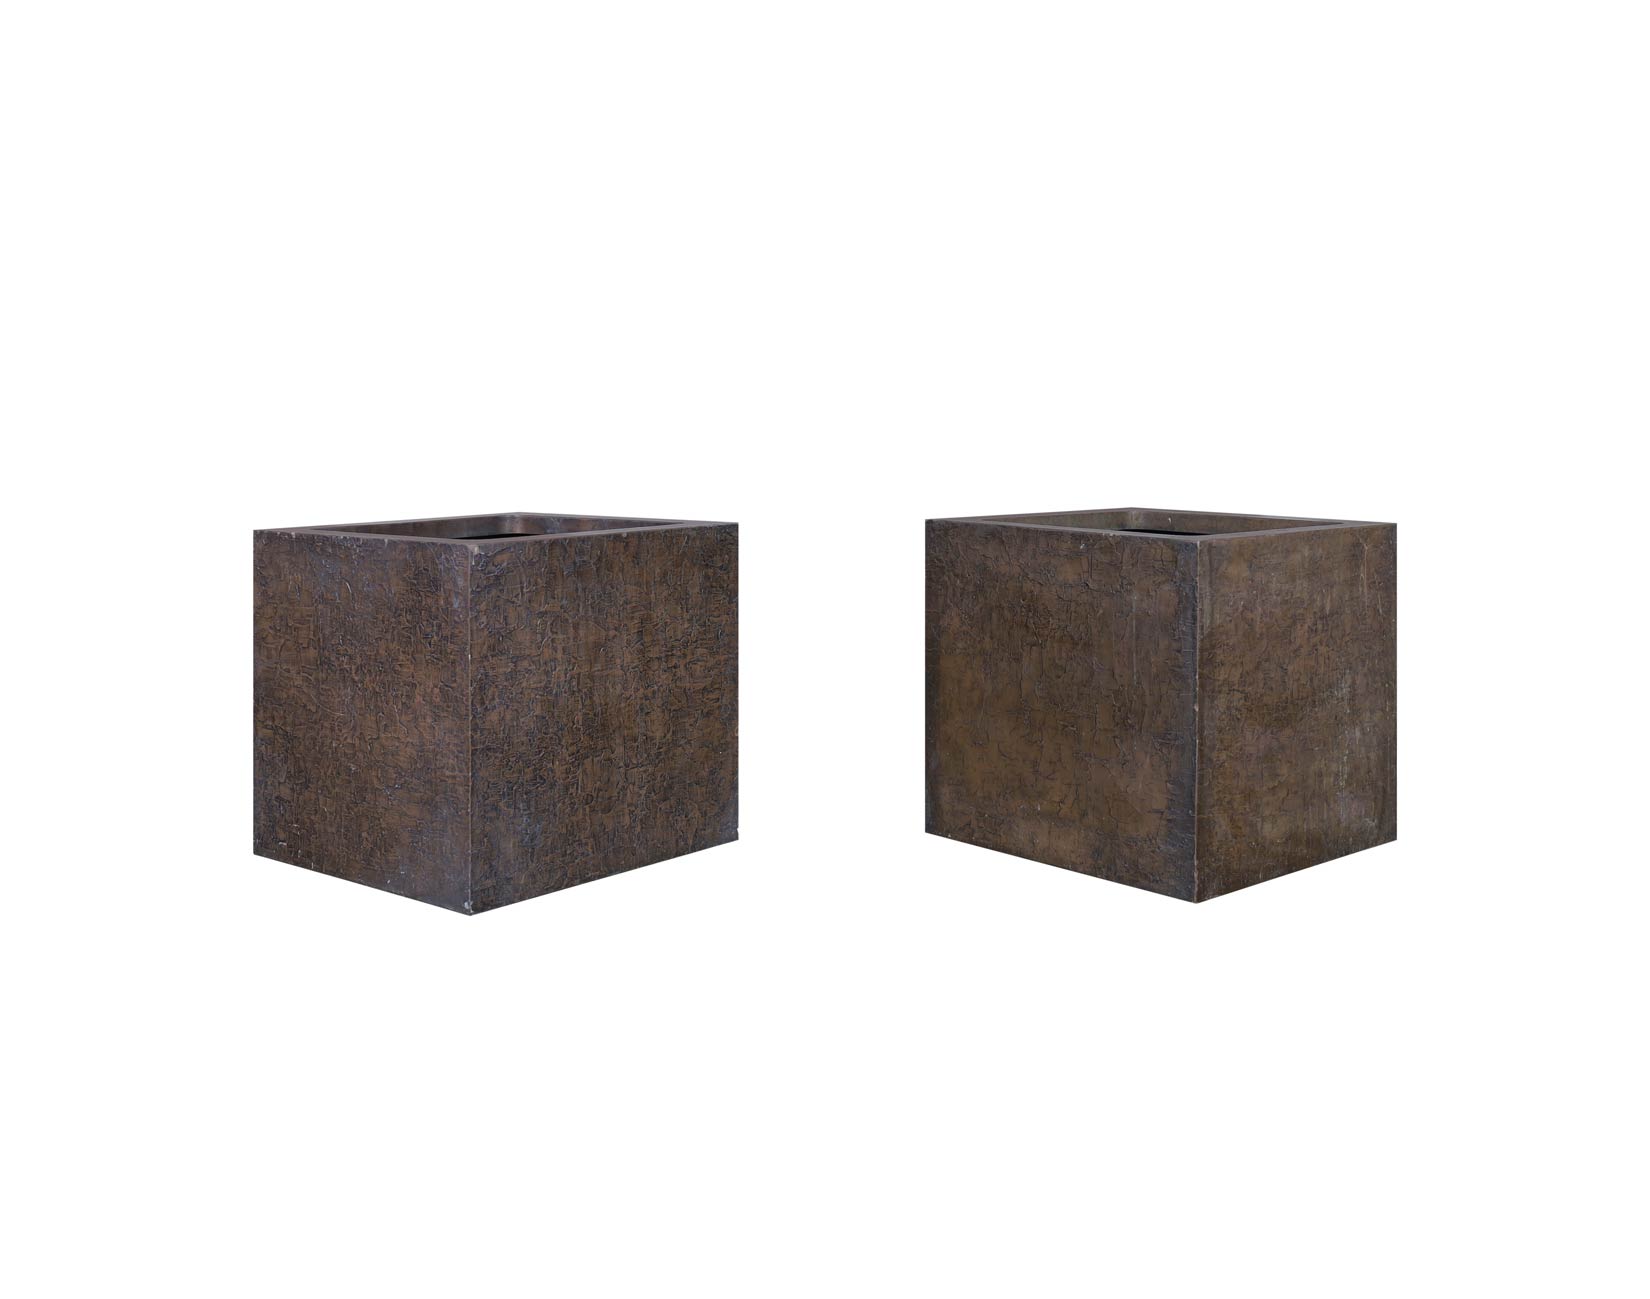 Vintage Bronze Resin Square Planters by Forms and Surfaces